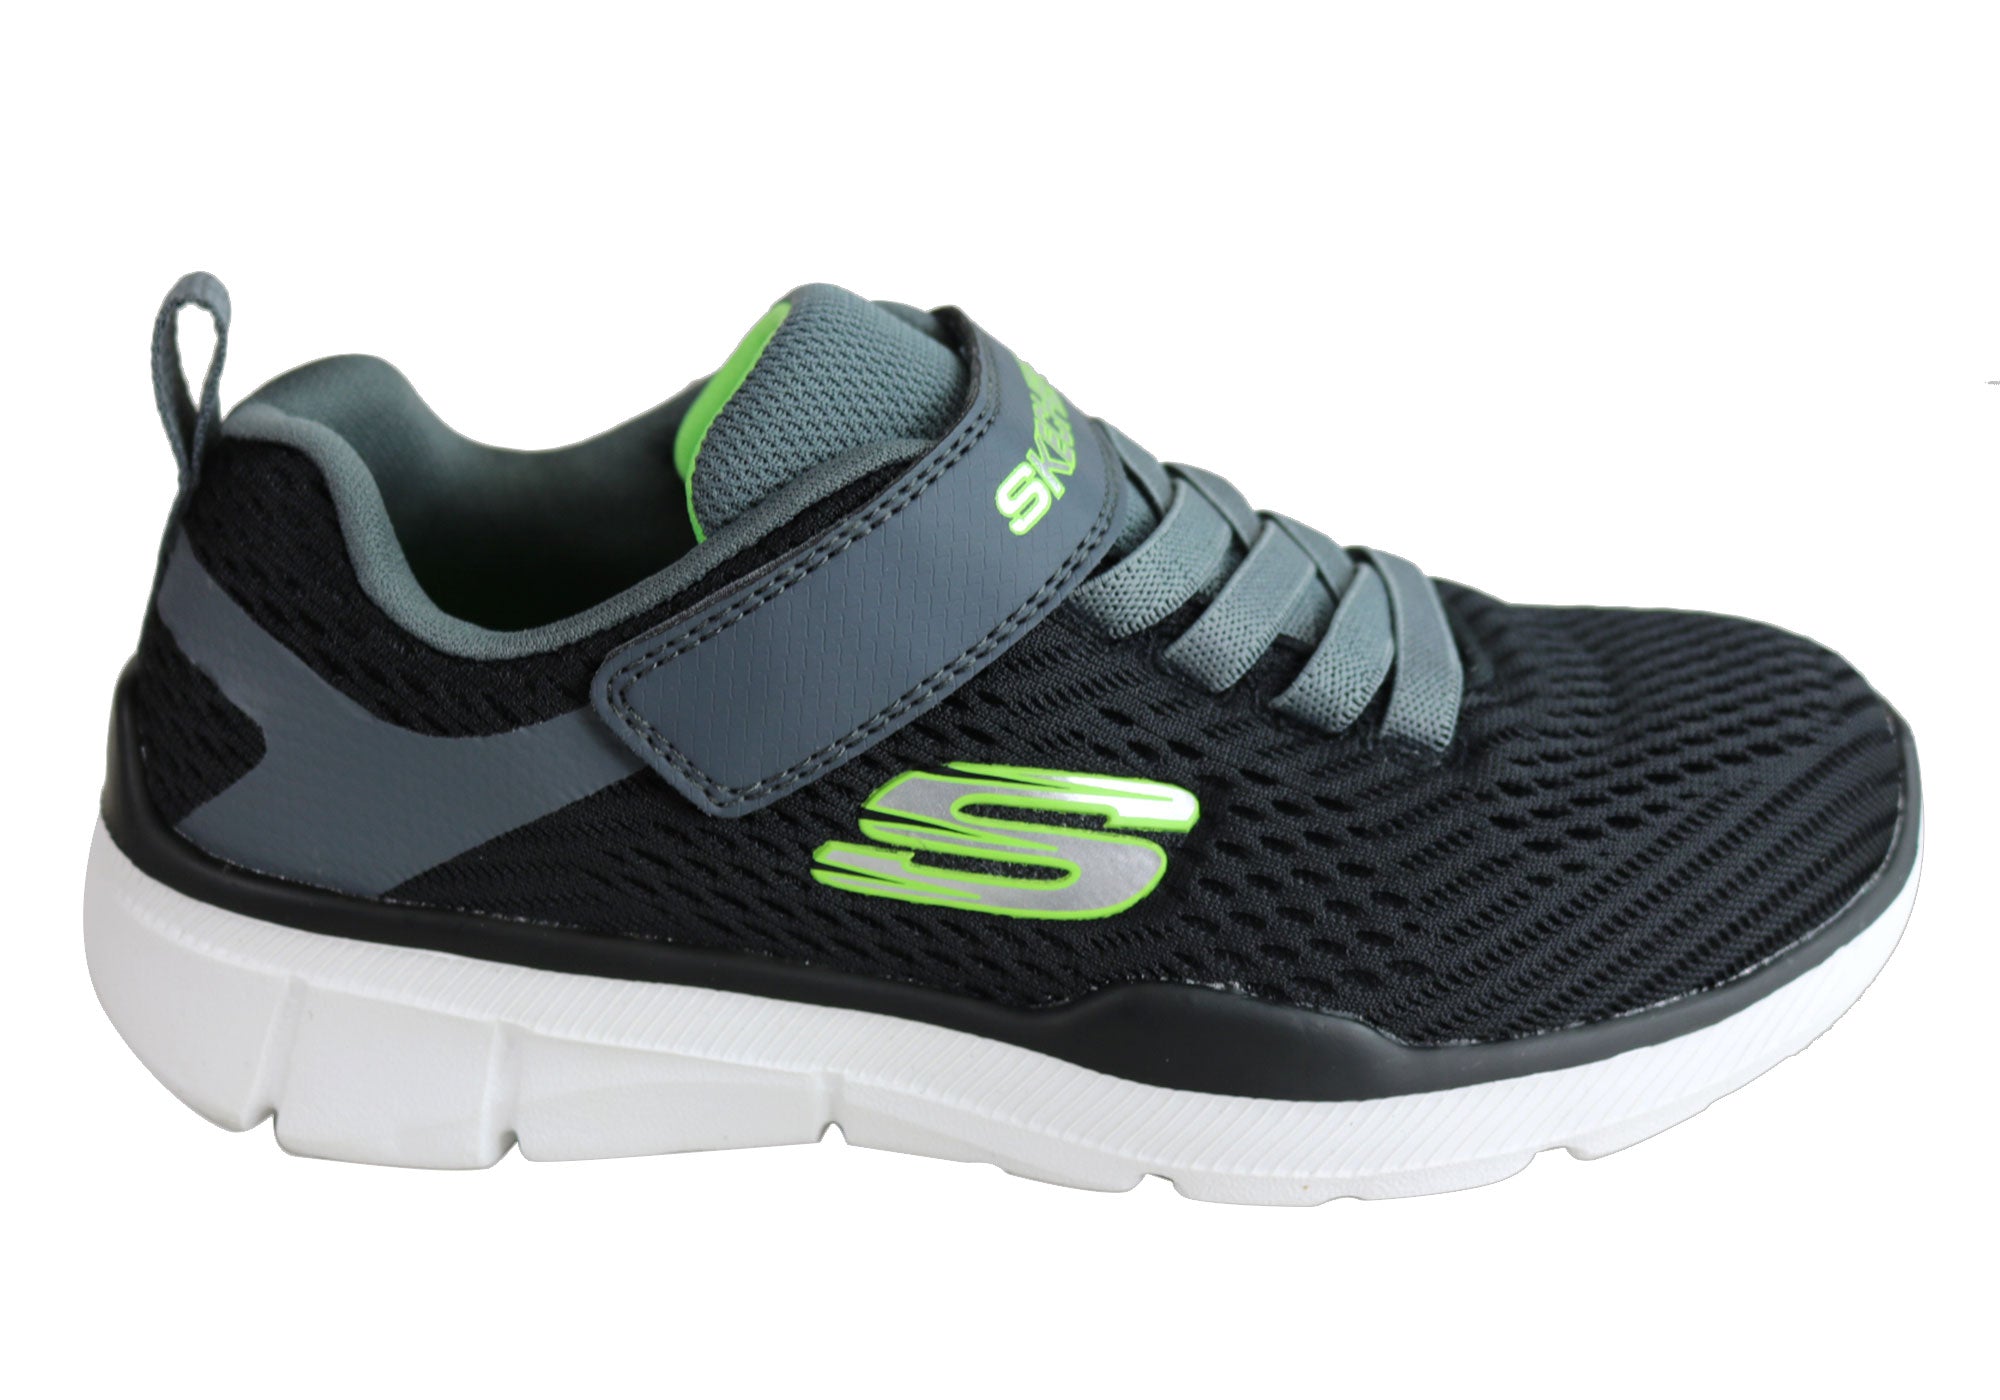 skechers equalizer running shoes review